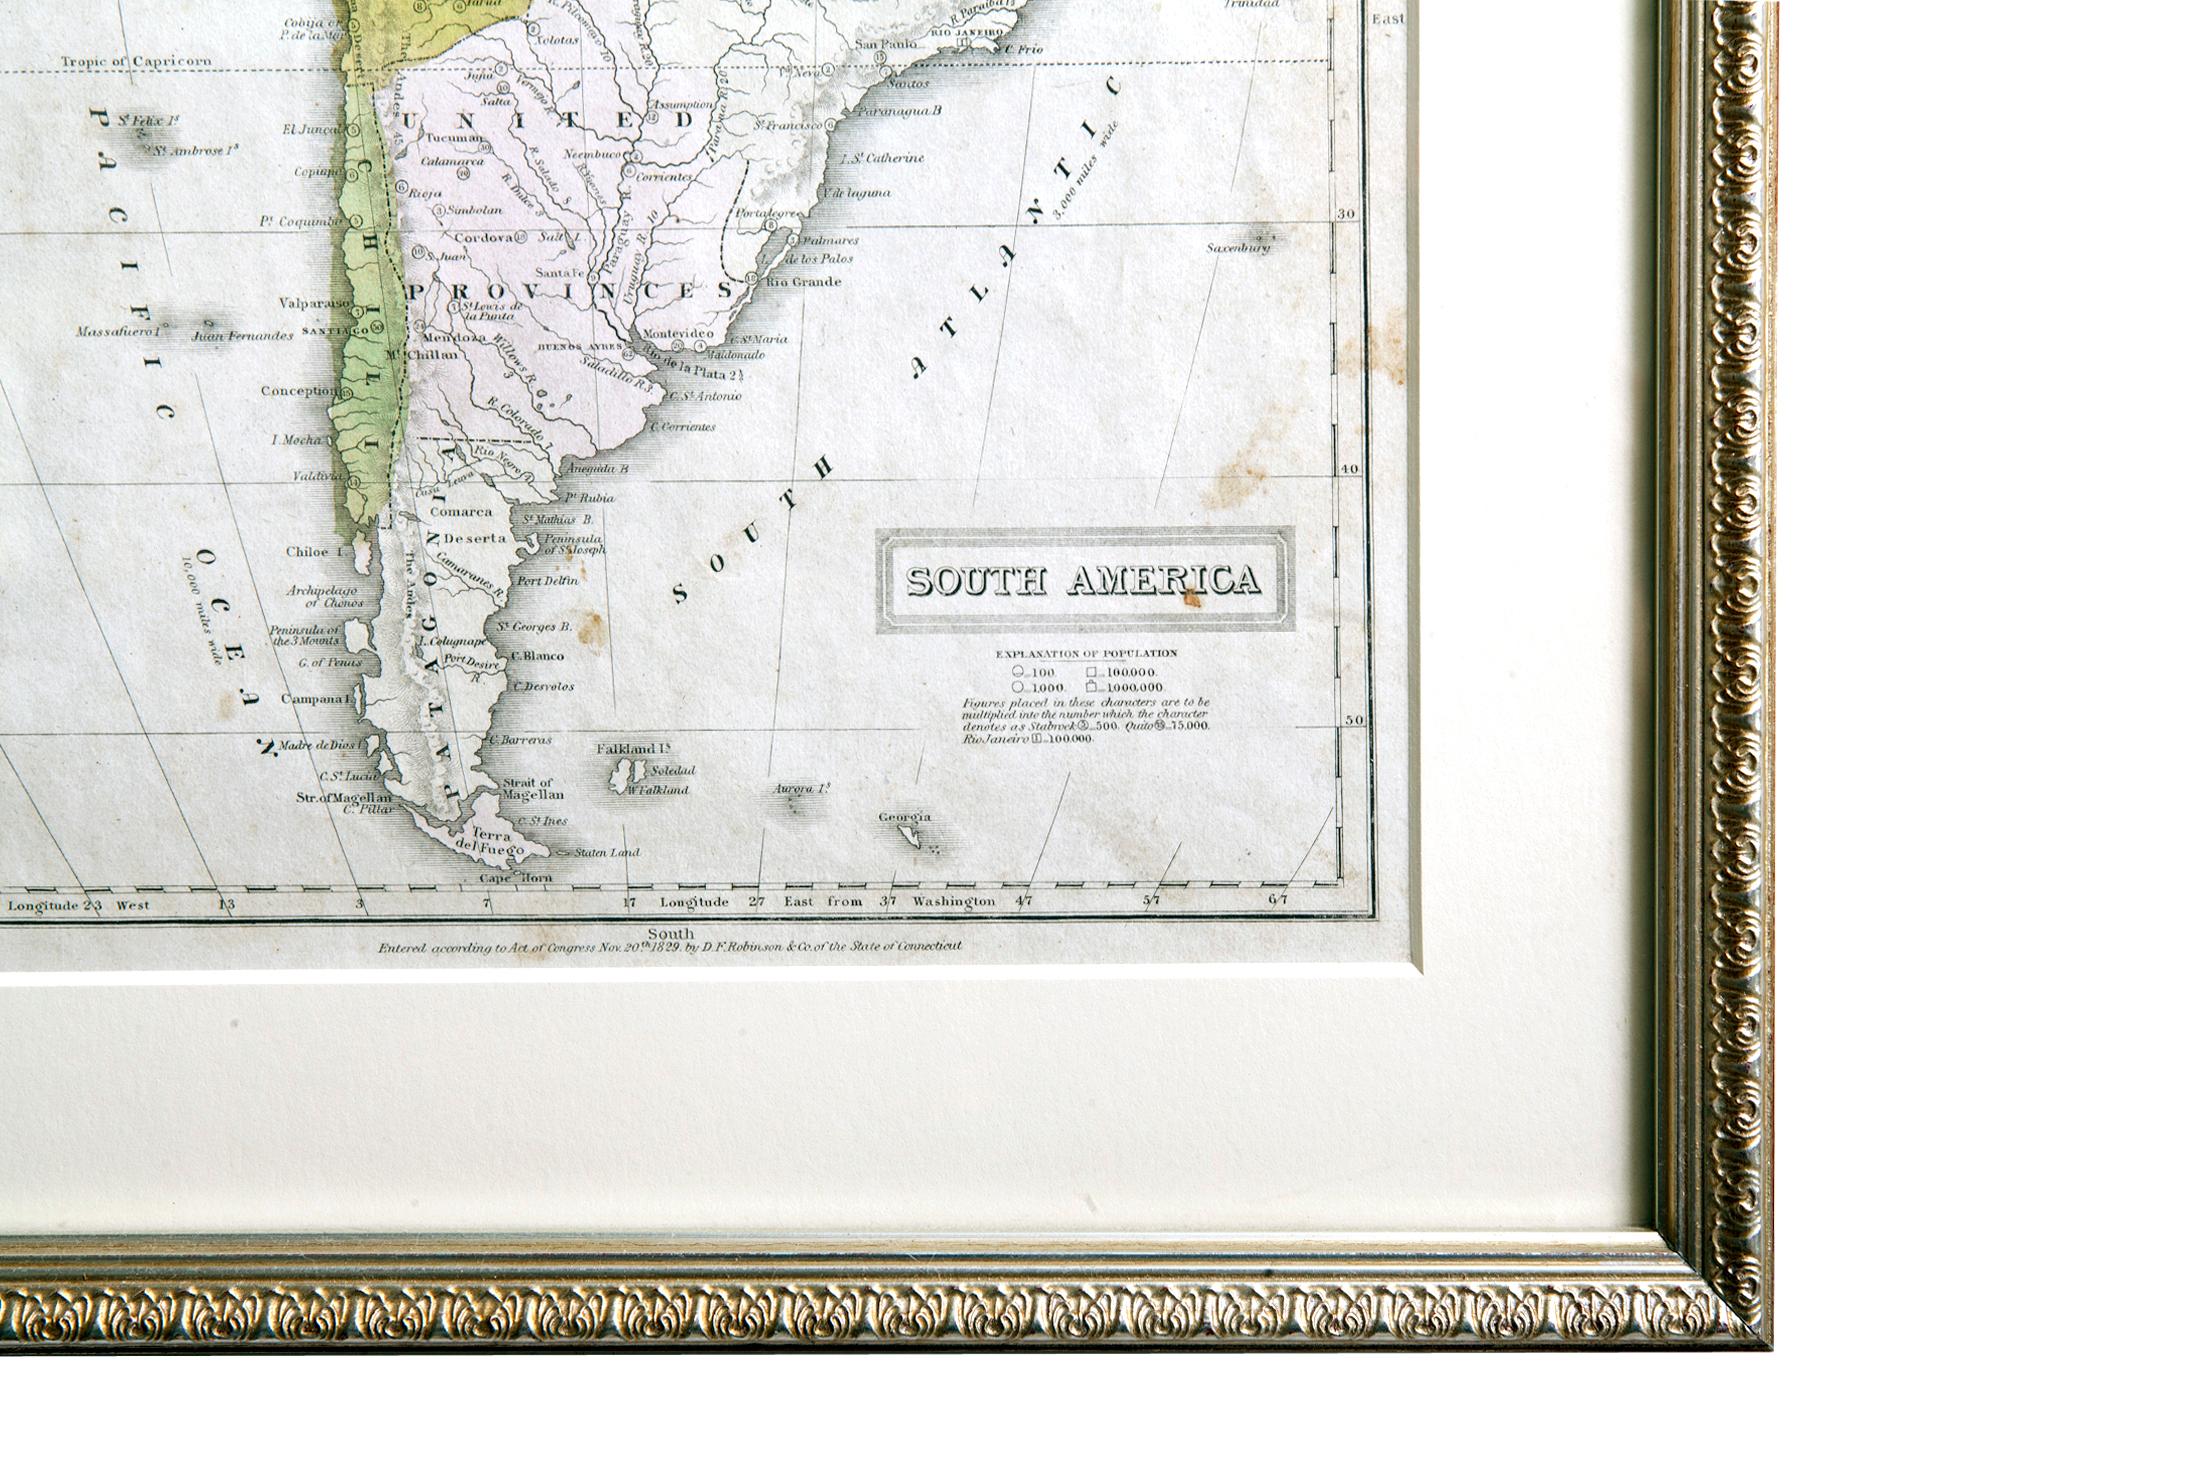 Antique map of South America. Displayed in a new Roma frame with museum quality matting. Custom frame in platinum. No print date, but certification guarantees this hand colored map to be at least 100 years old.